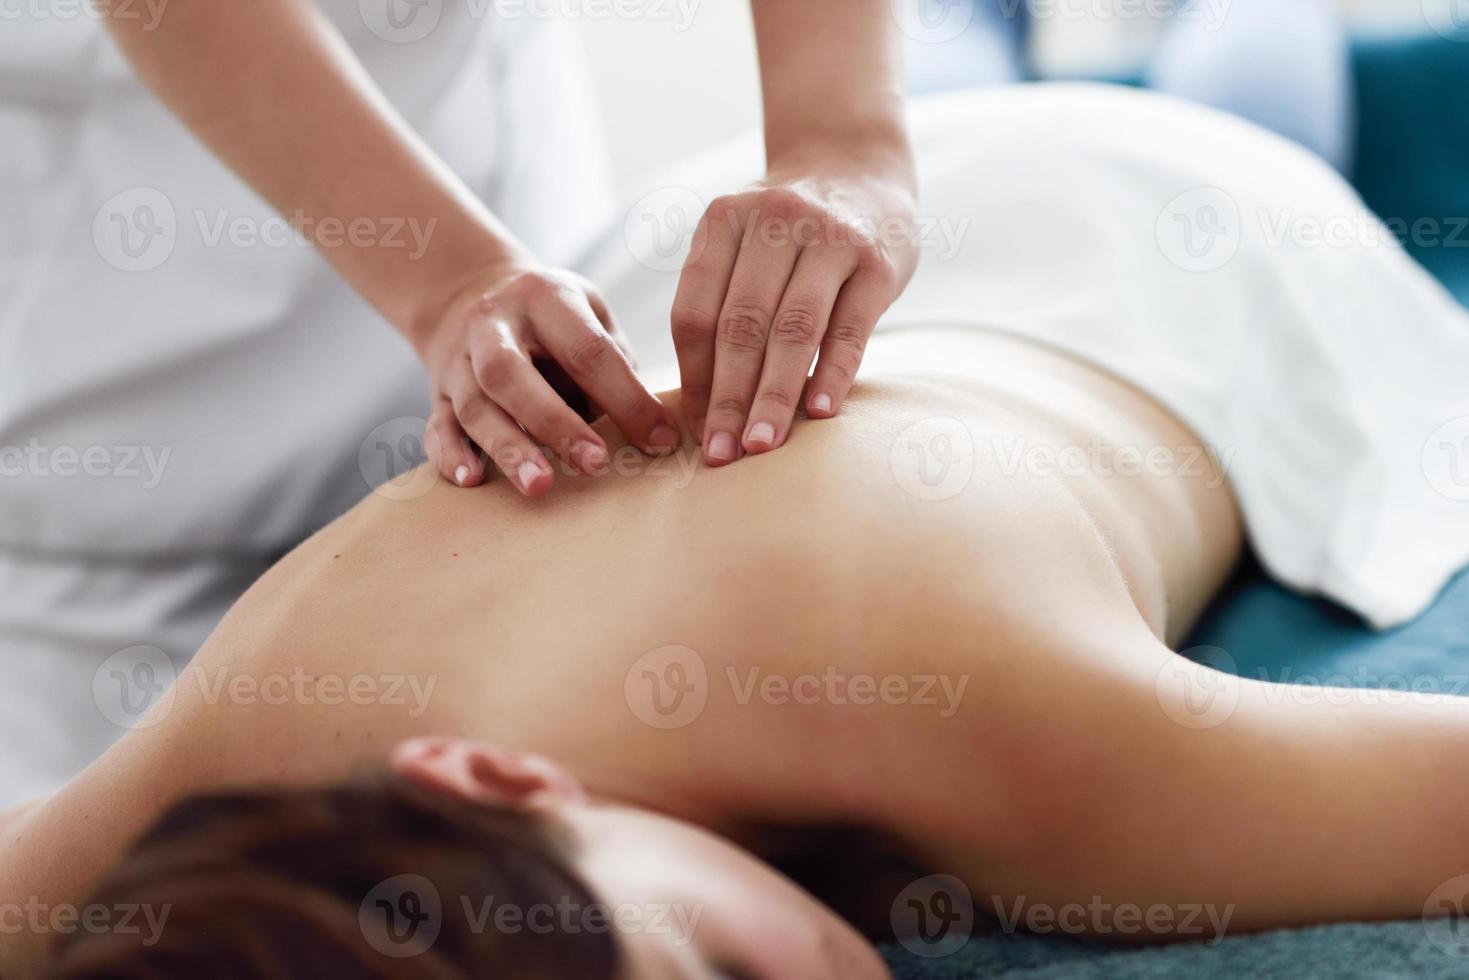 Young woman receiving a back massage by professional therapist. photo